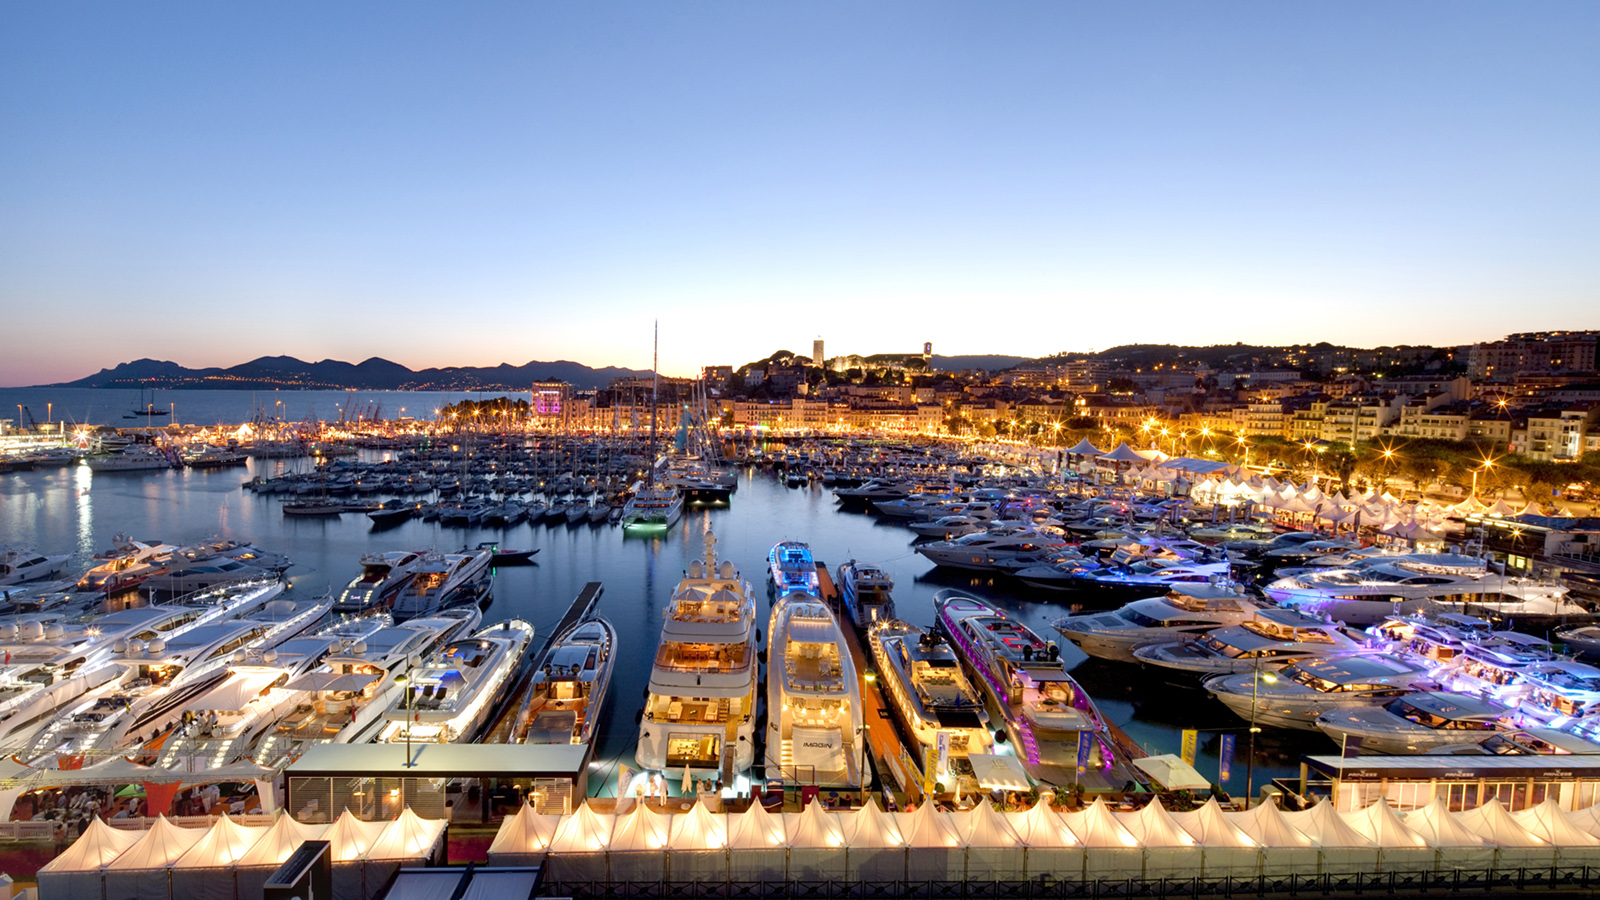 Cannes Yachting Festival, the largest boat show in Europe